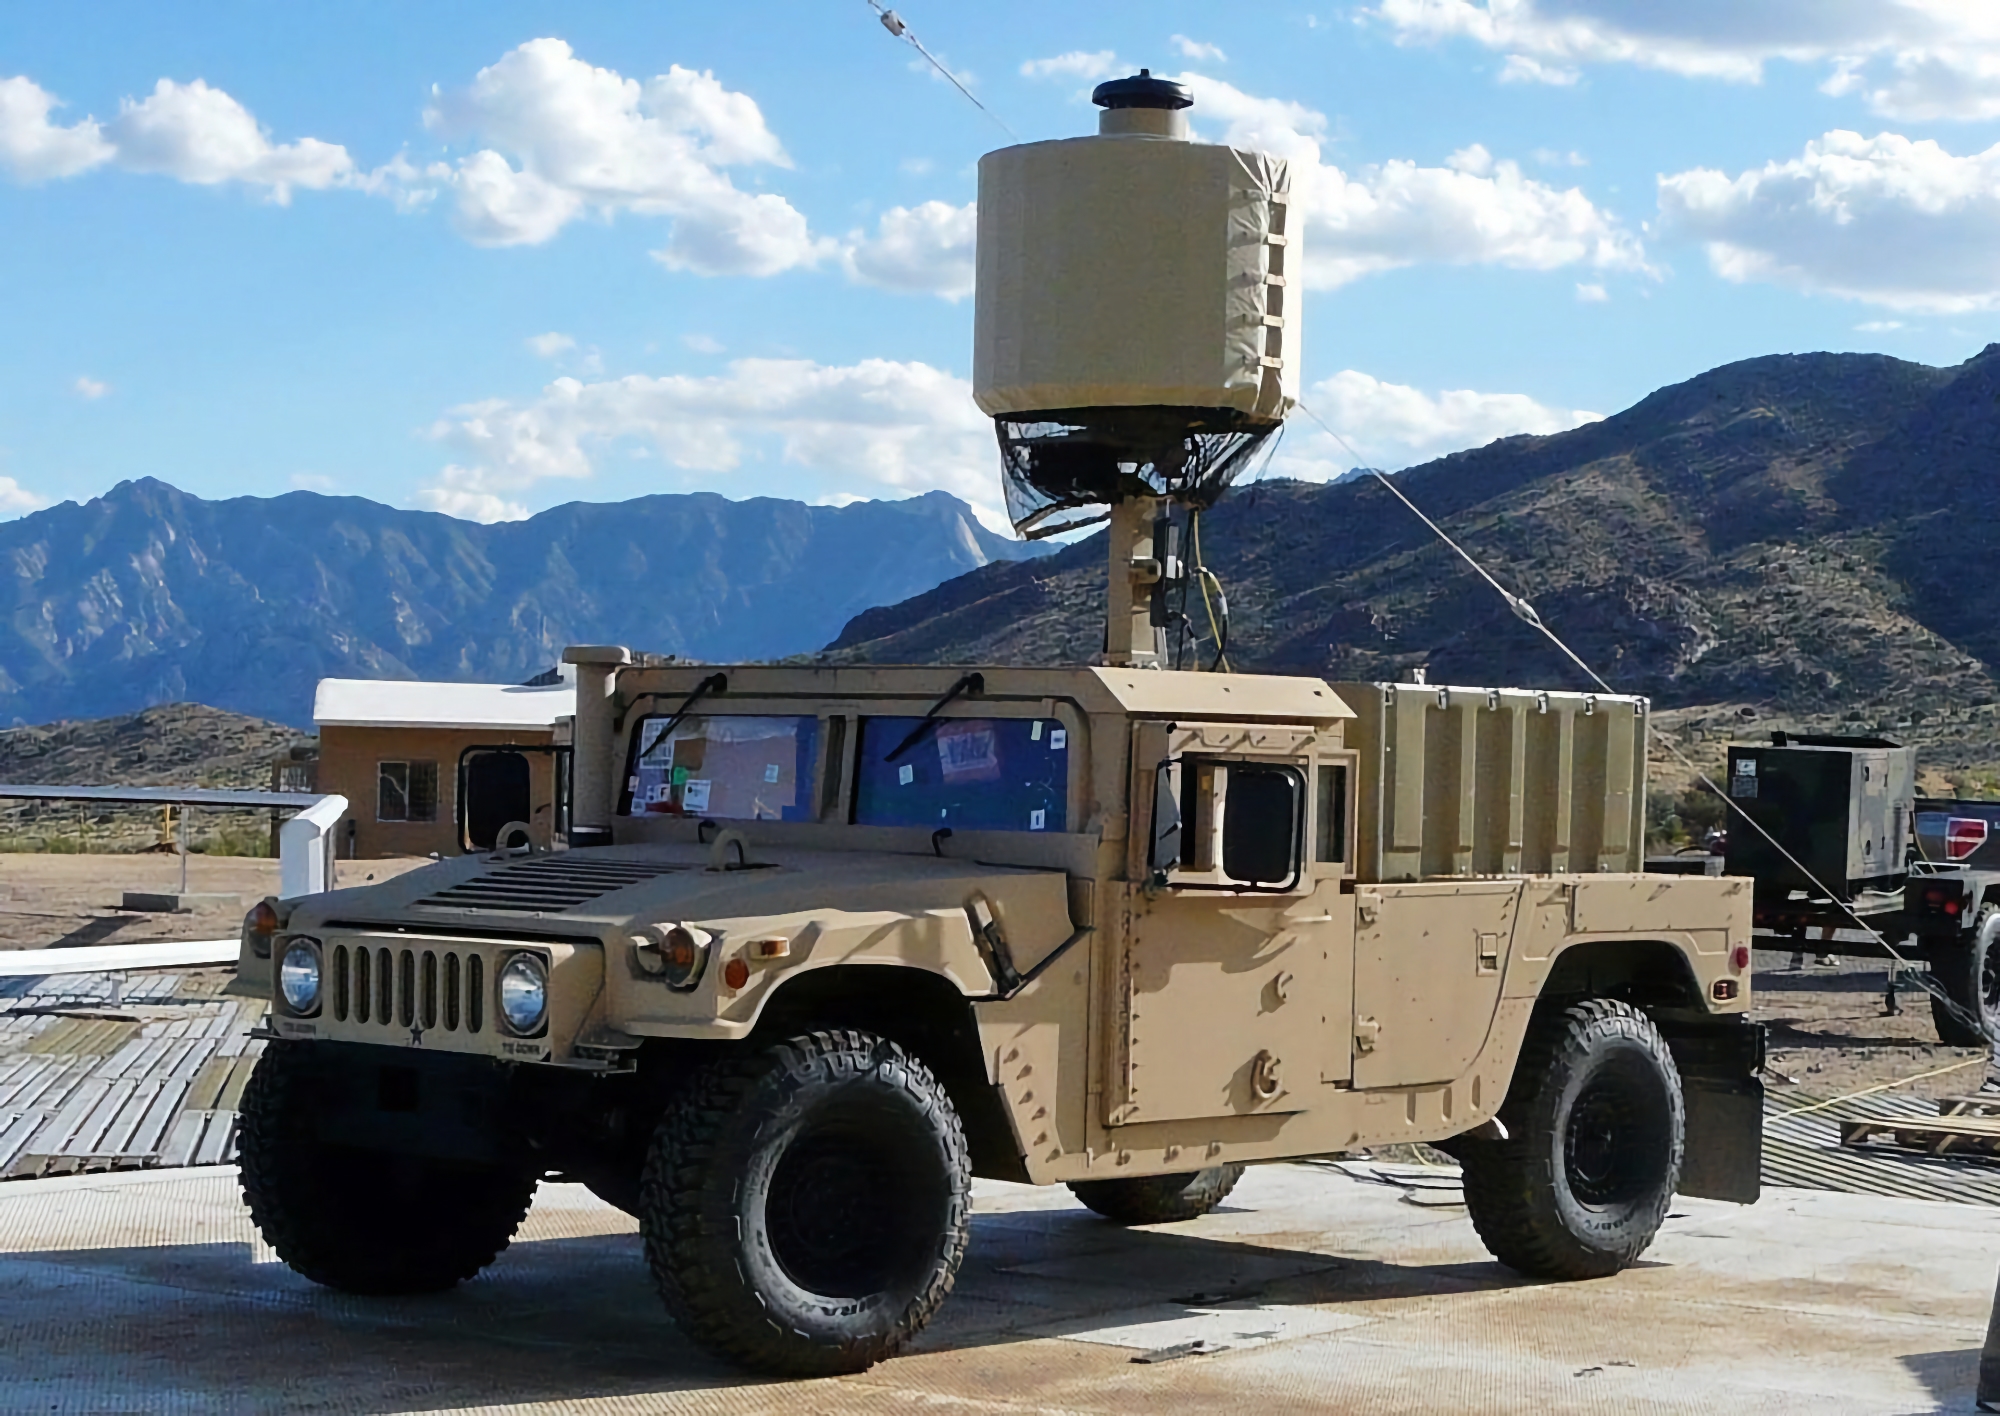 $12,096,538 contract: U.S. orders SRCTec LLC to modify AN/TPQ-50 radars for Ukraine, capable of detecting artillery, rocket and mortar fire